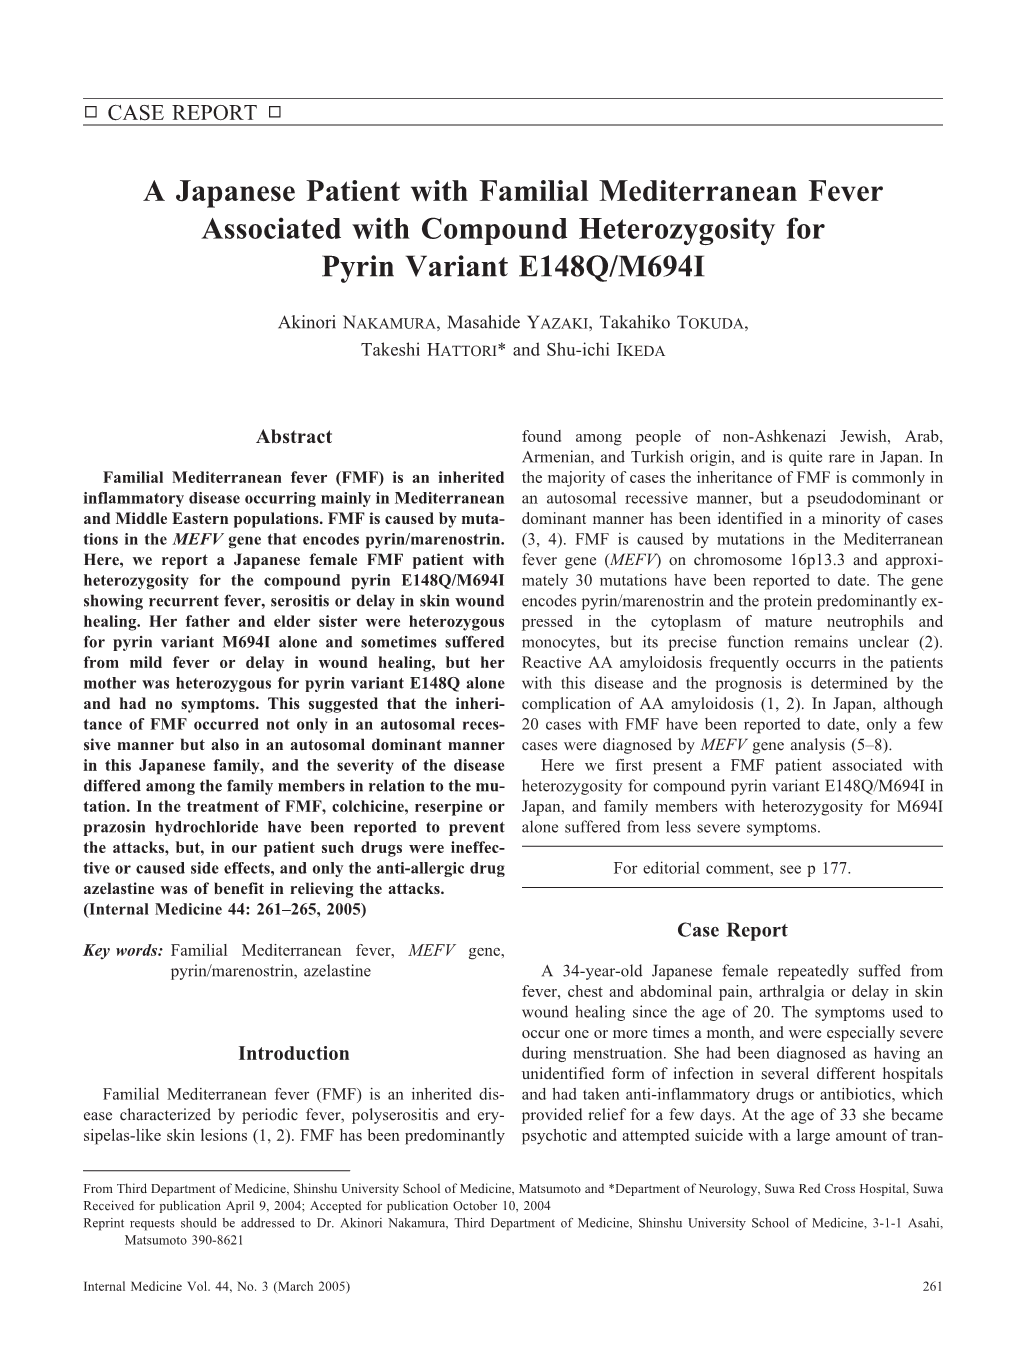 A Japanese Patient with Familial Mediterranean Fever Associated with Compound Heterozygosity for Pyrin Variant E148Q/M694I